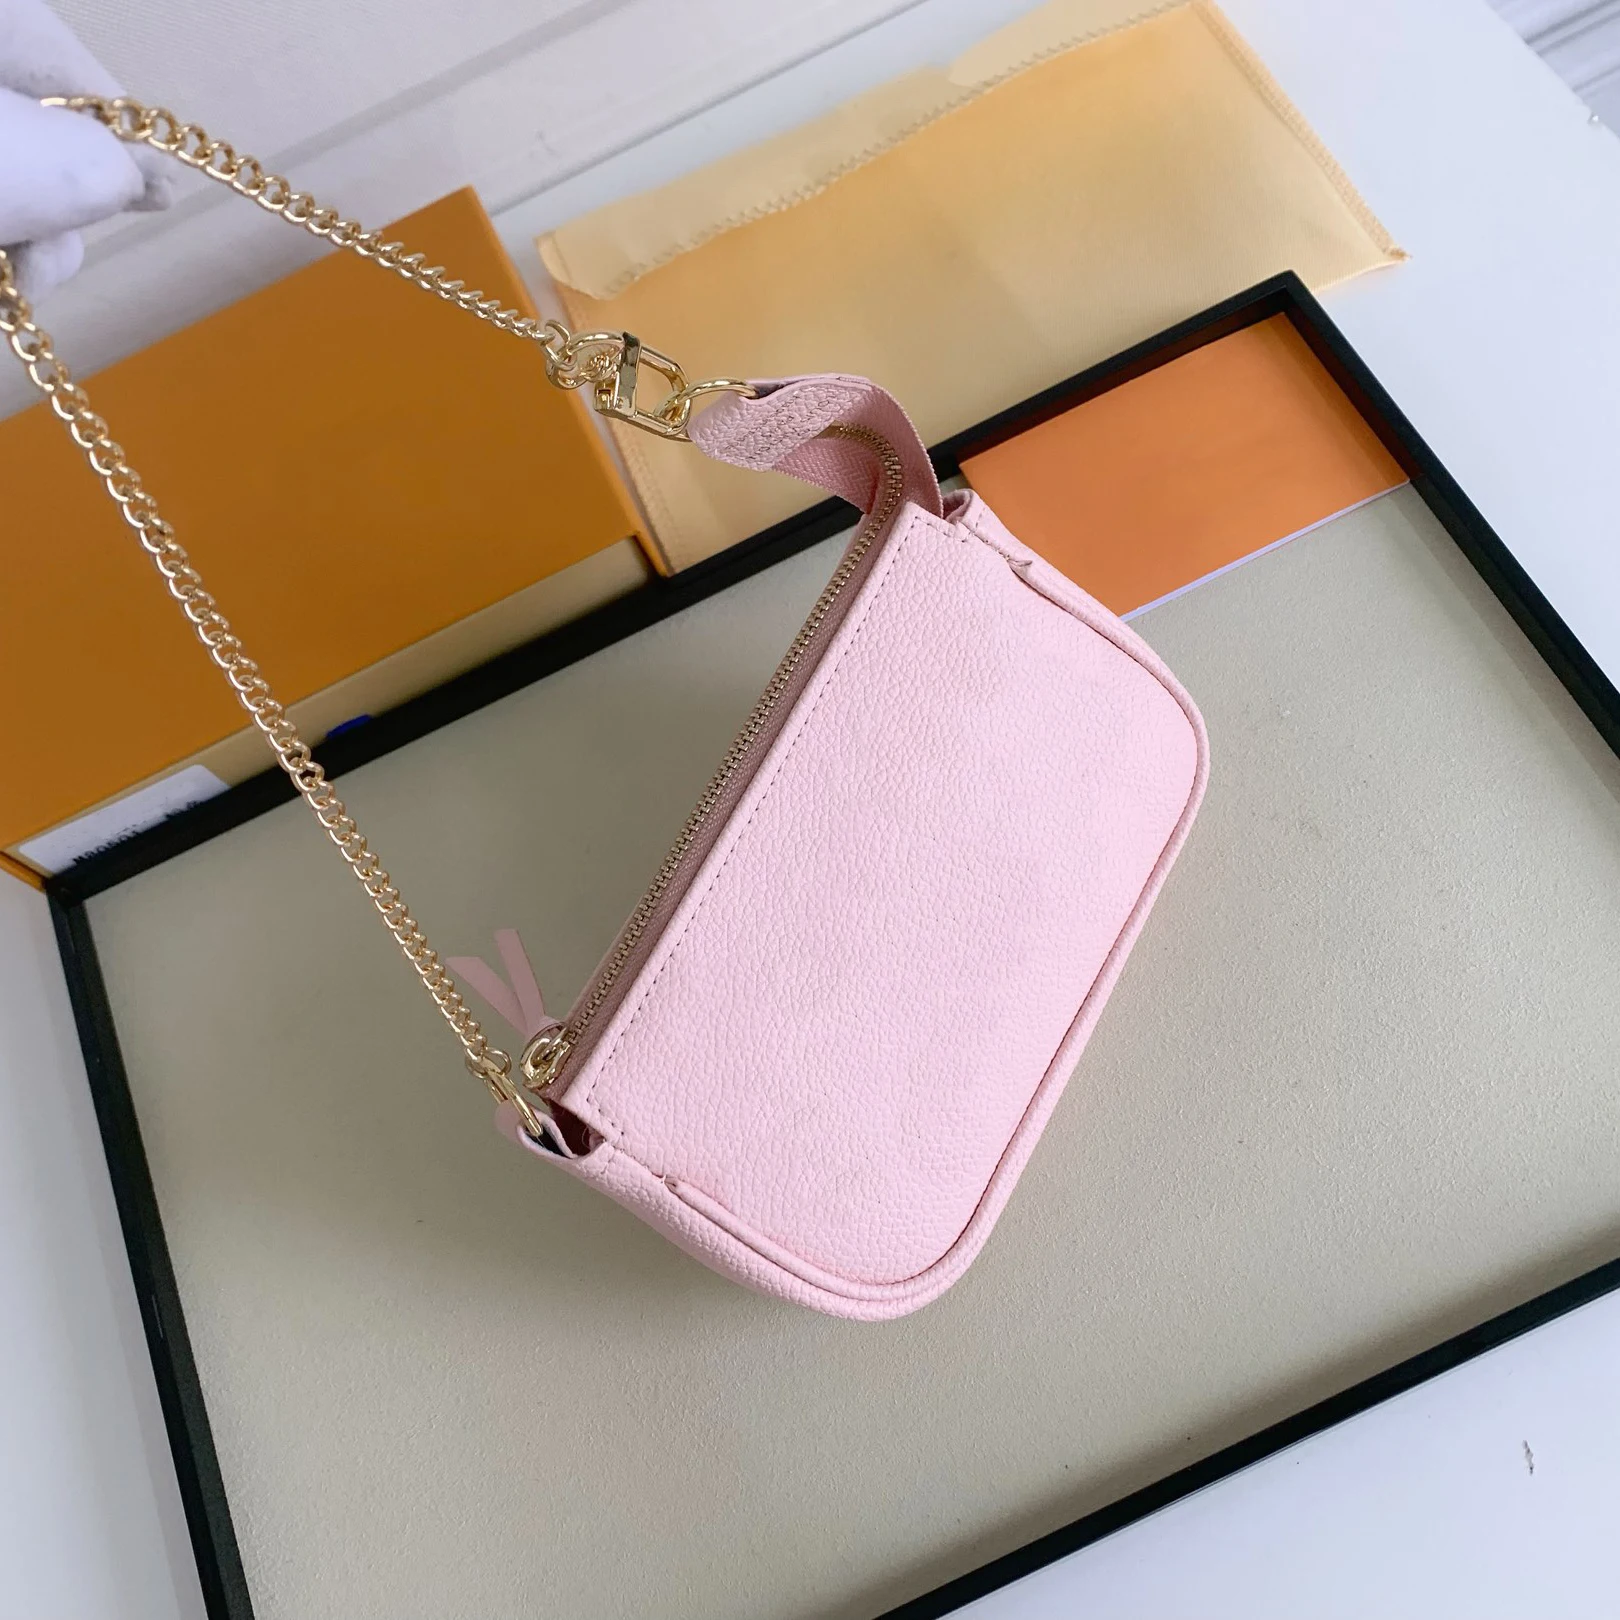 

High quality Luxury leather Women's shoulder bag Mini pochette accessoires handbag gold metal chain with gift box delivery